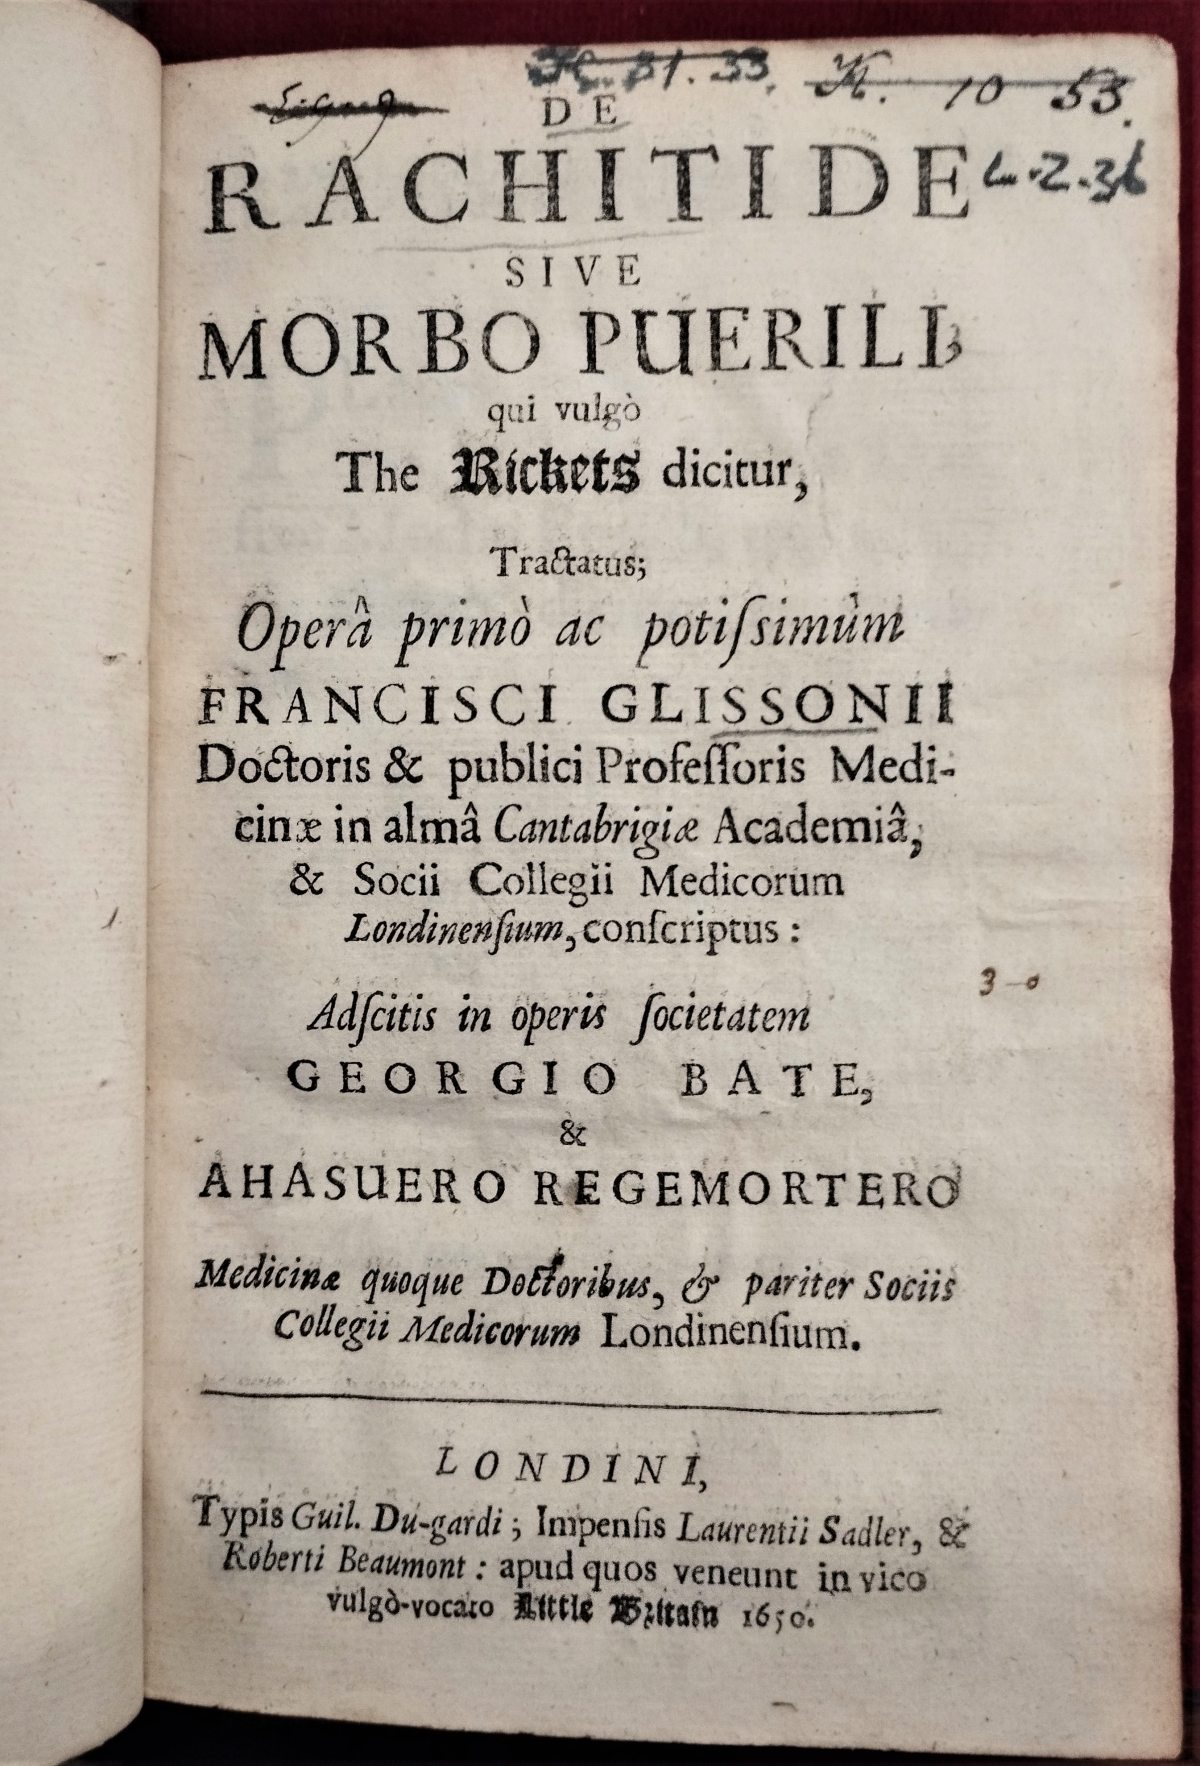 Title page of the book "De rachitide, siue, morbo puerili, qui vulgò the rickets dicitur, tractatus" by Francis Glisson (1650). Text in Latin.